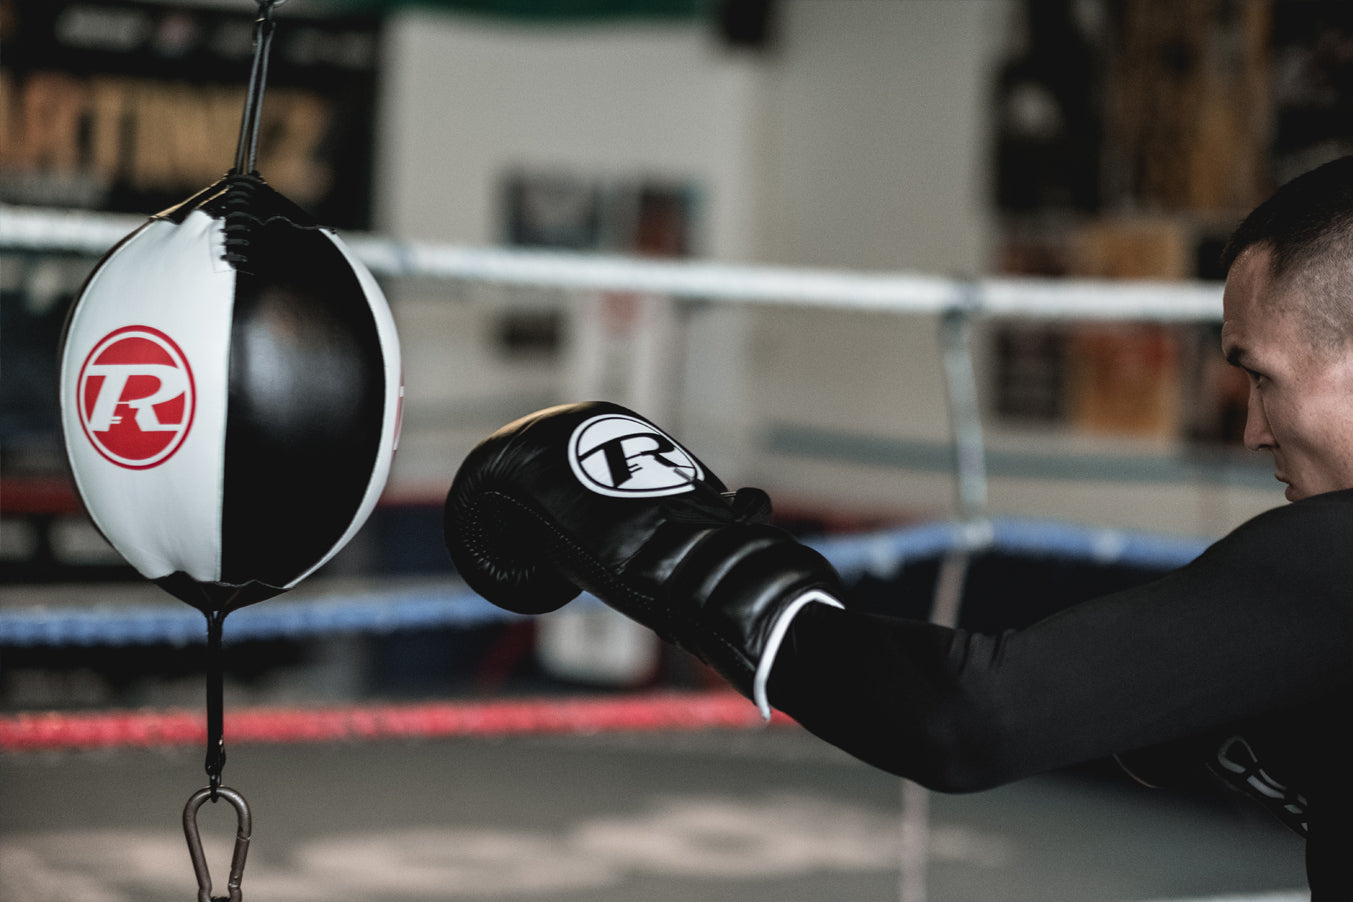 Boxer wearing black boxing gloves punching floor to ceiling ball